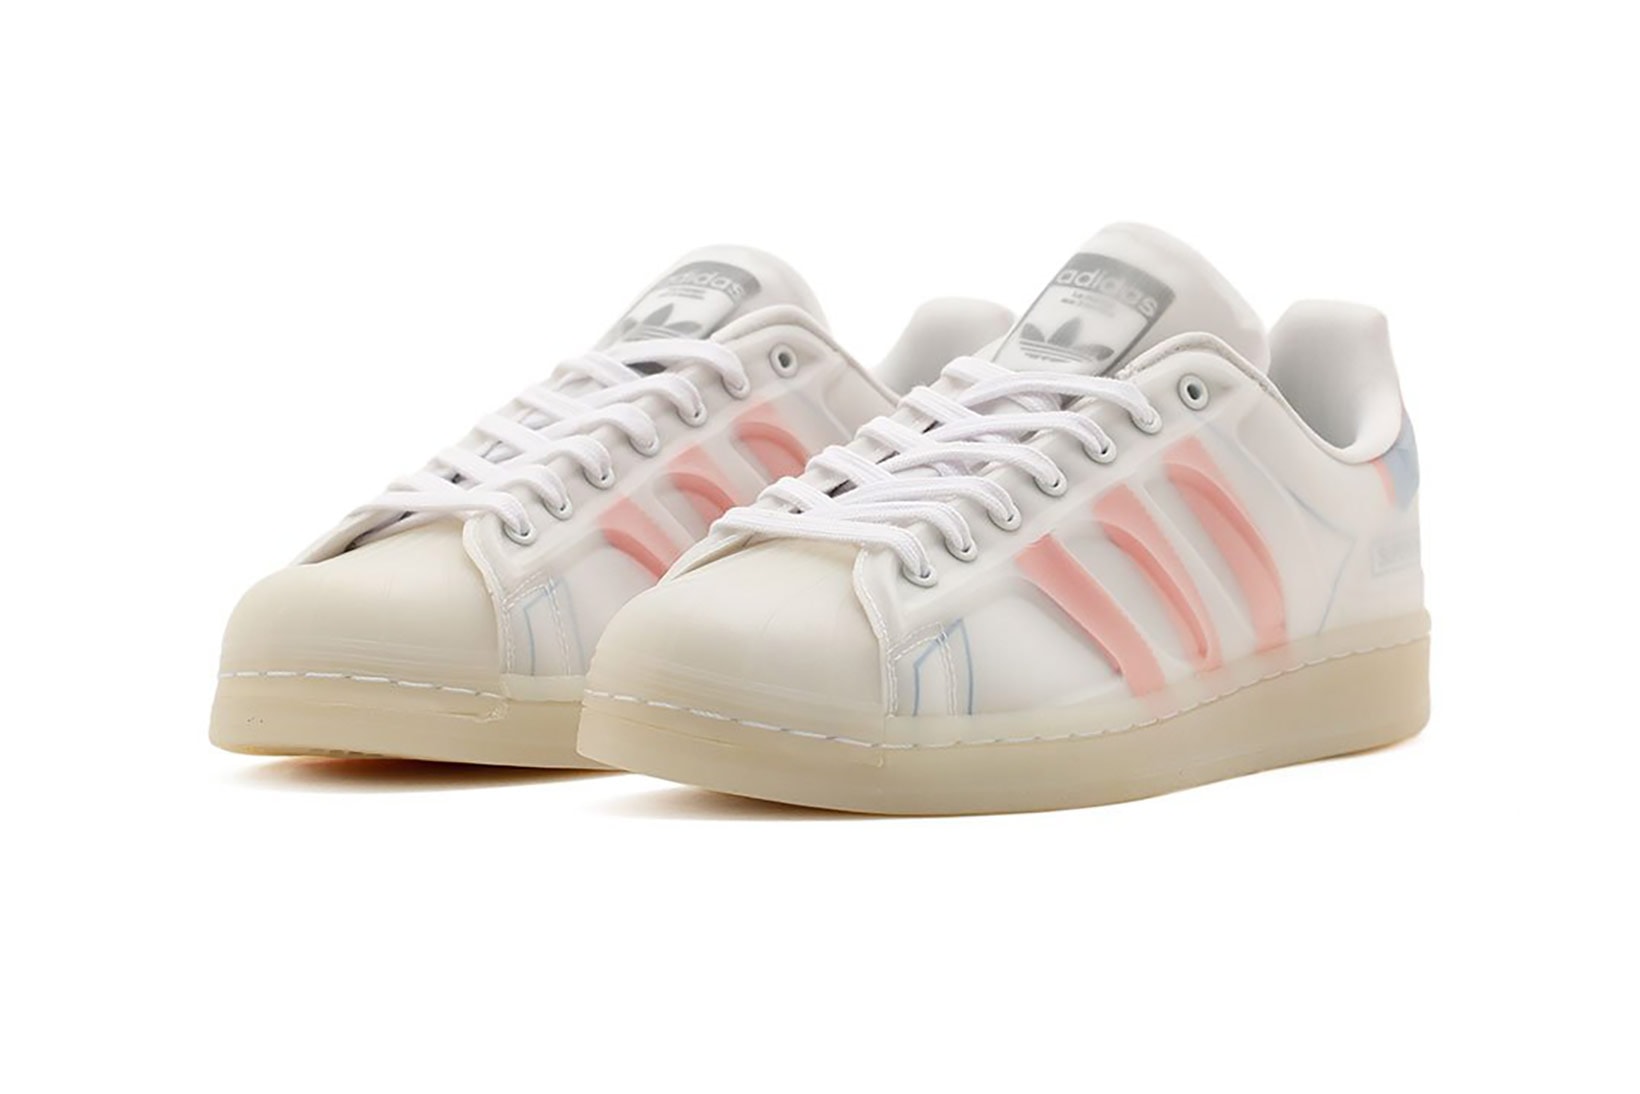 adidas superstar futurshell sneakers white coral pink blue colorway footwear shoes kicks sneakerhead lateral laces